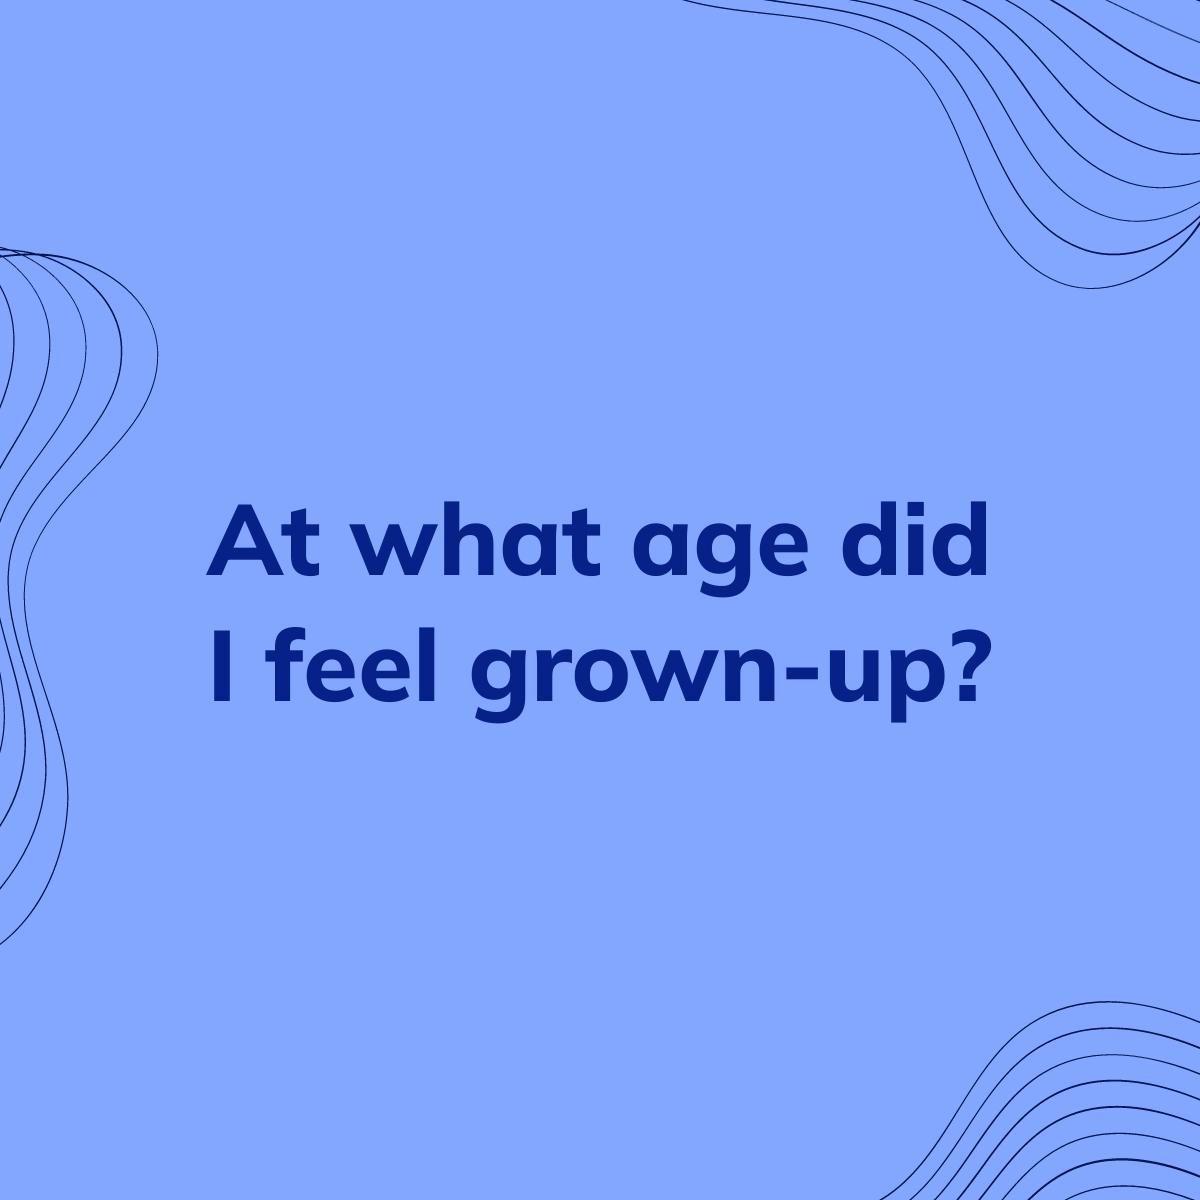 Journal Prompt: At what age did I feel grown-up?